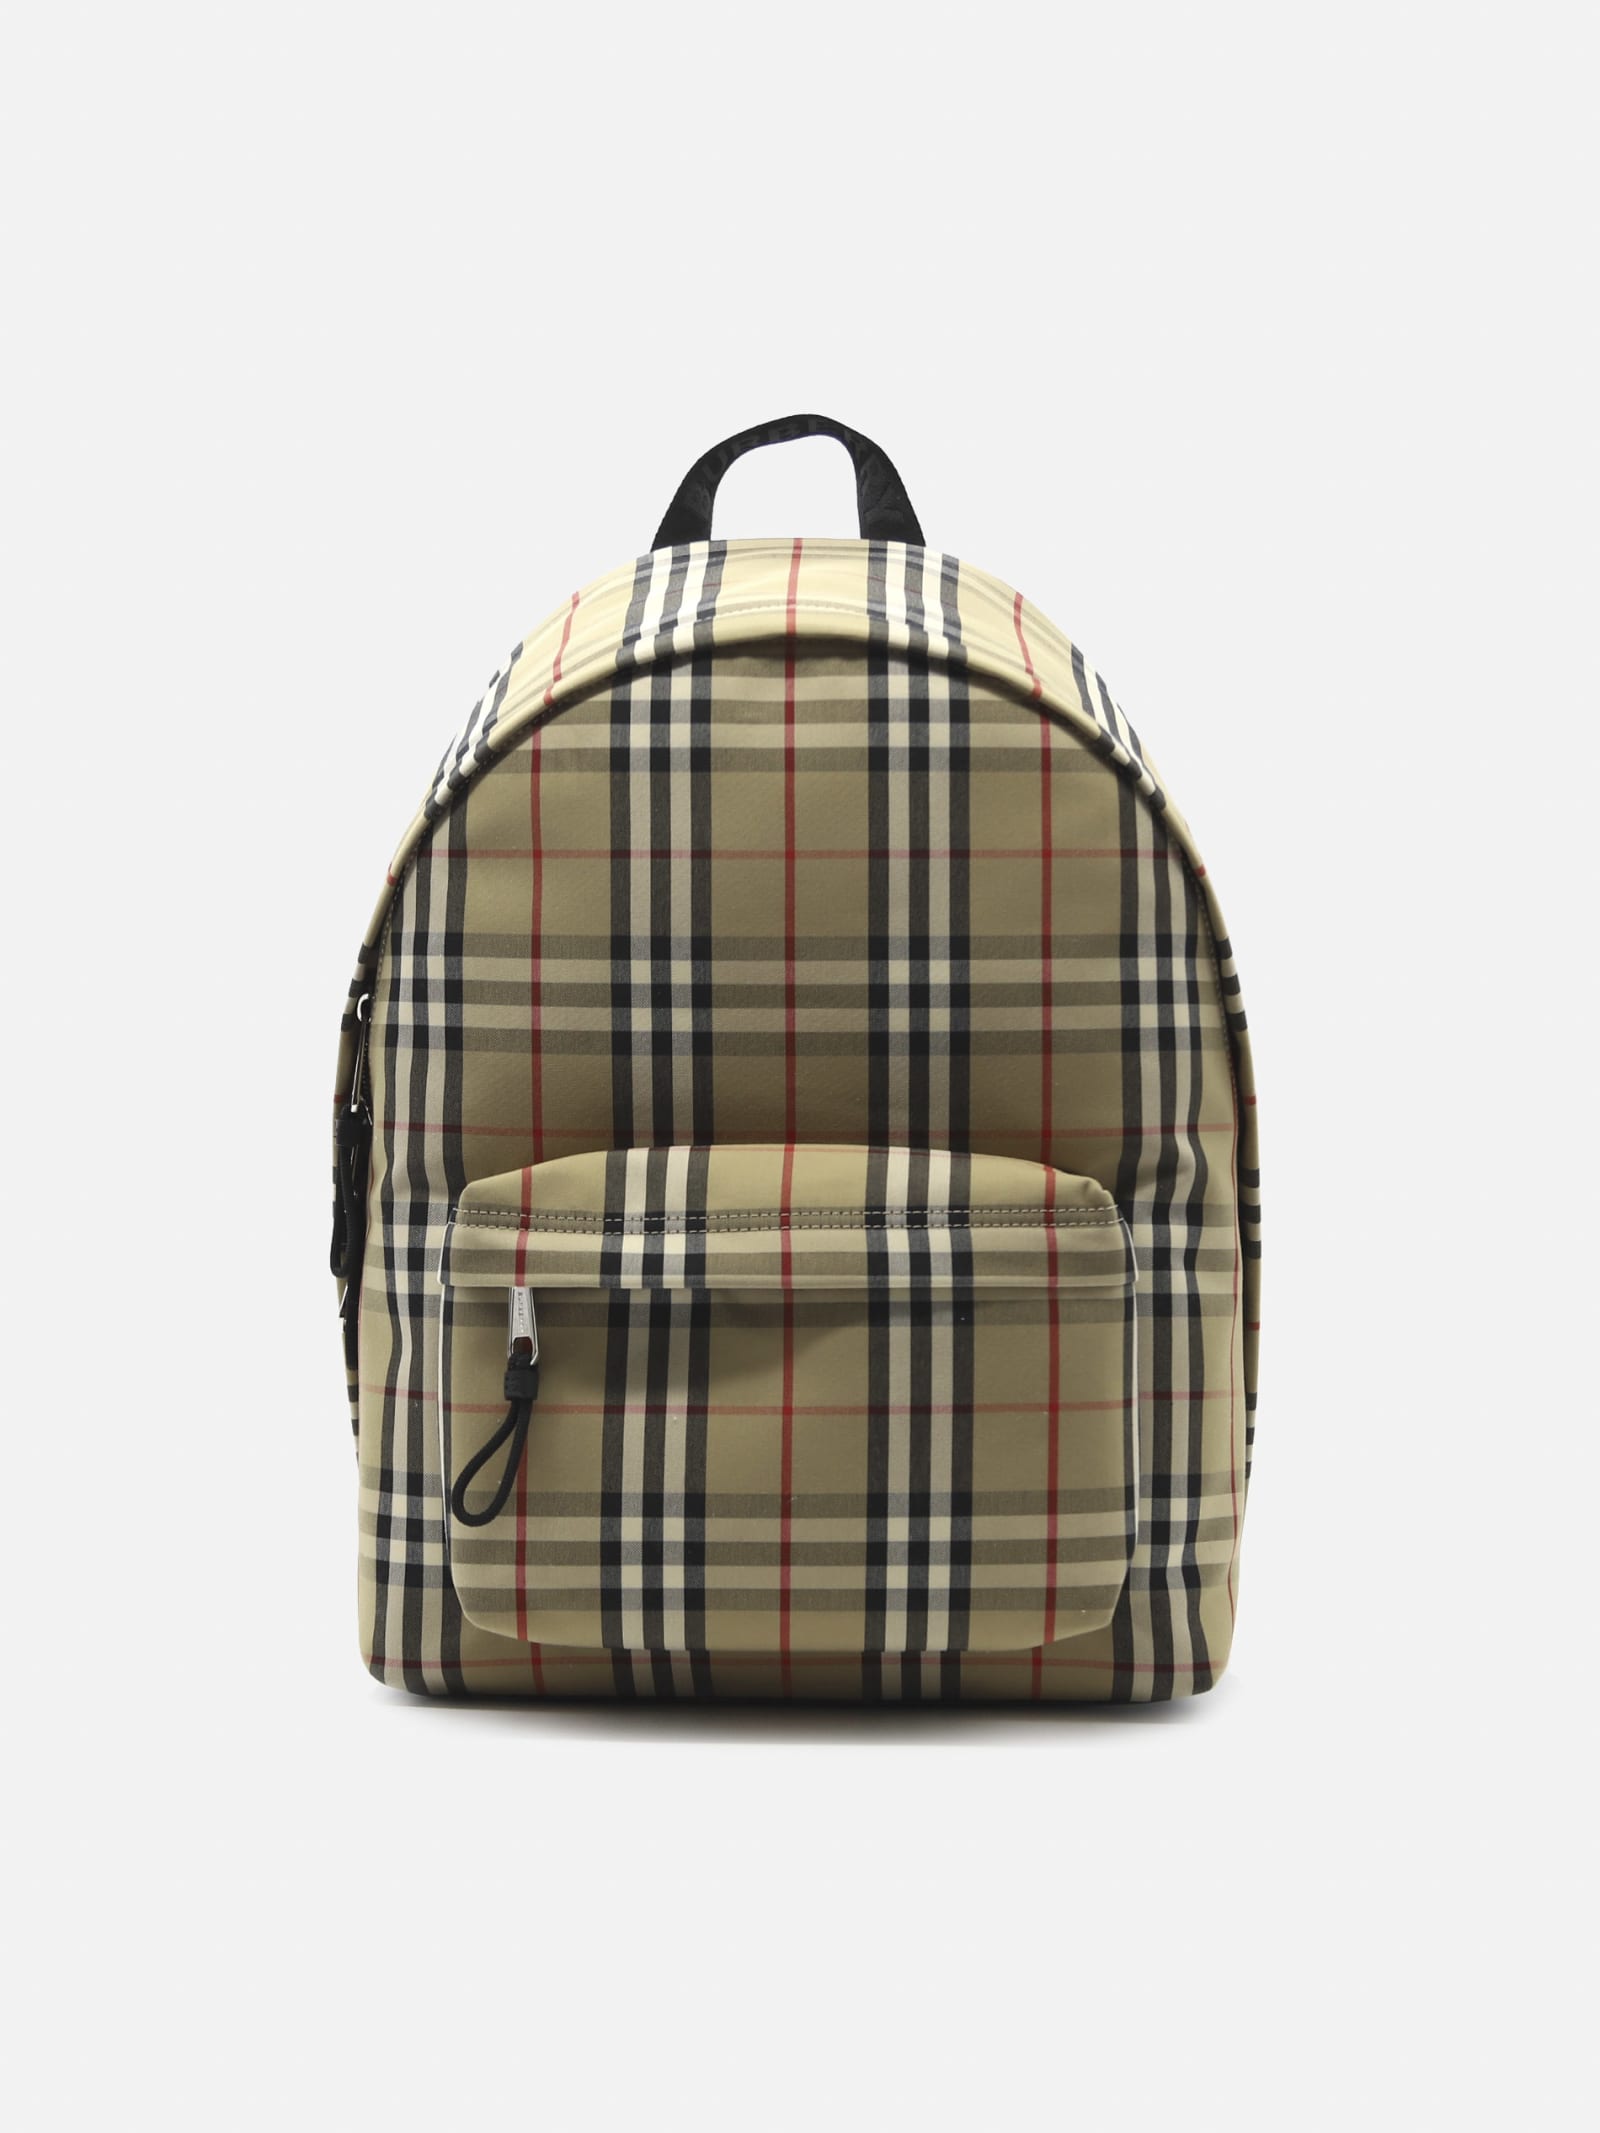 Backpack With Vintage Check Motif In Archive Beige